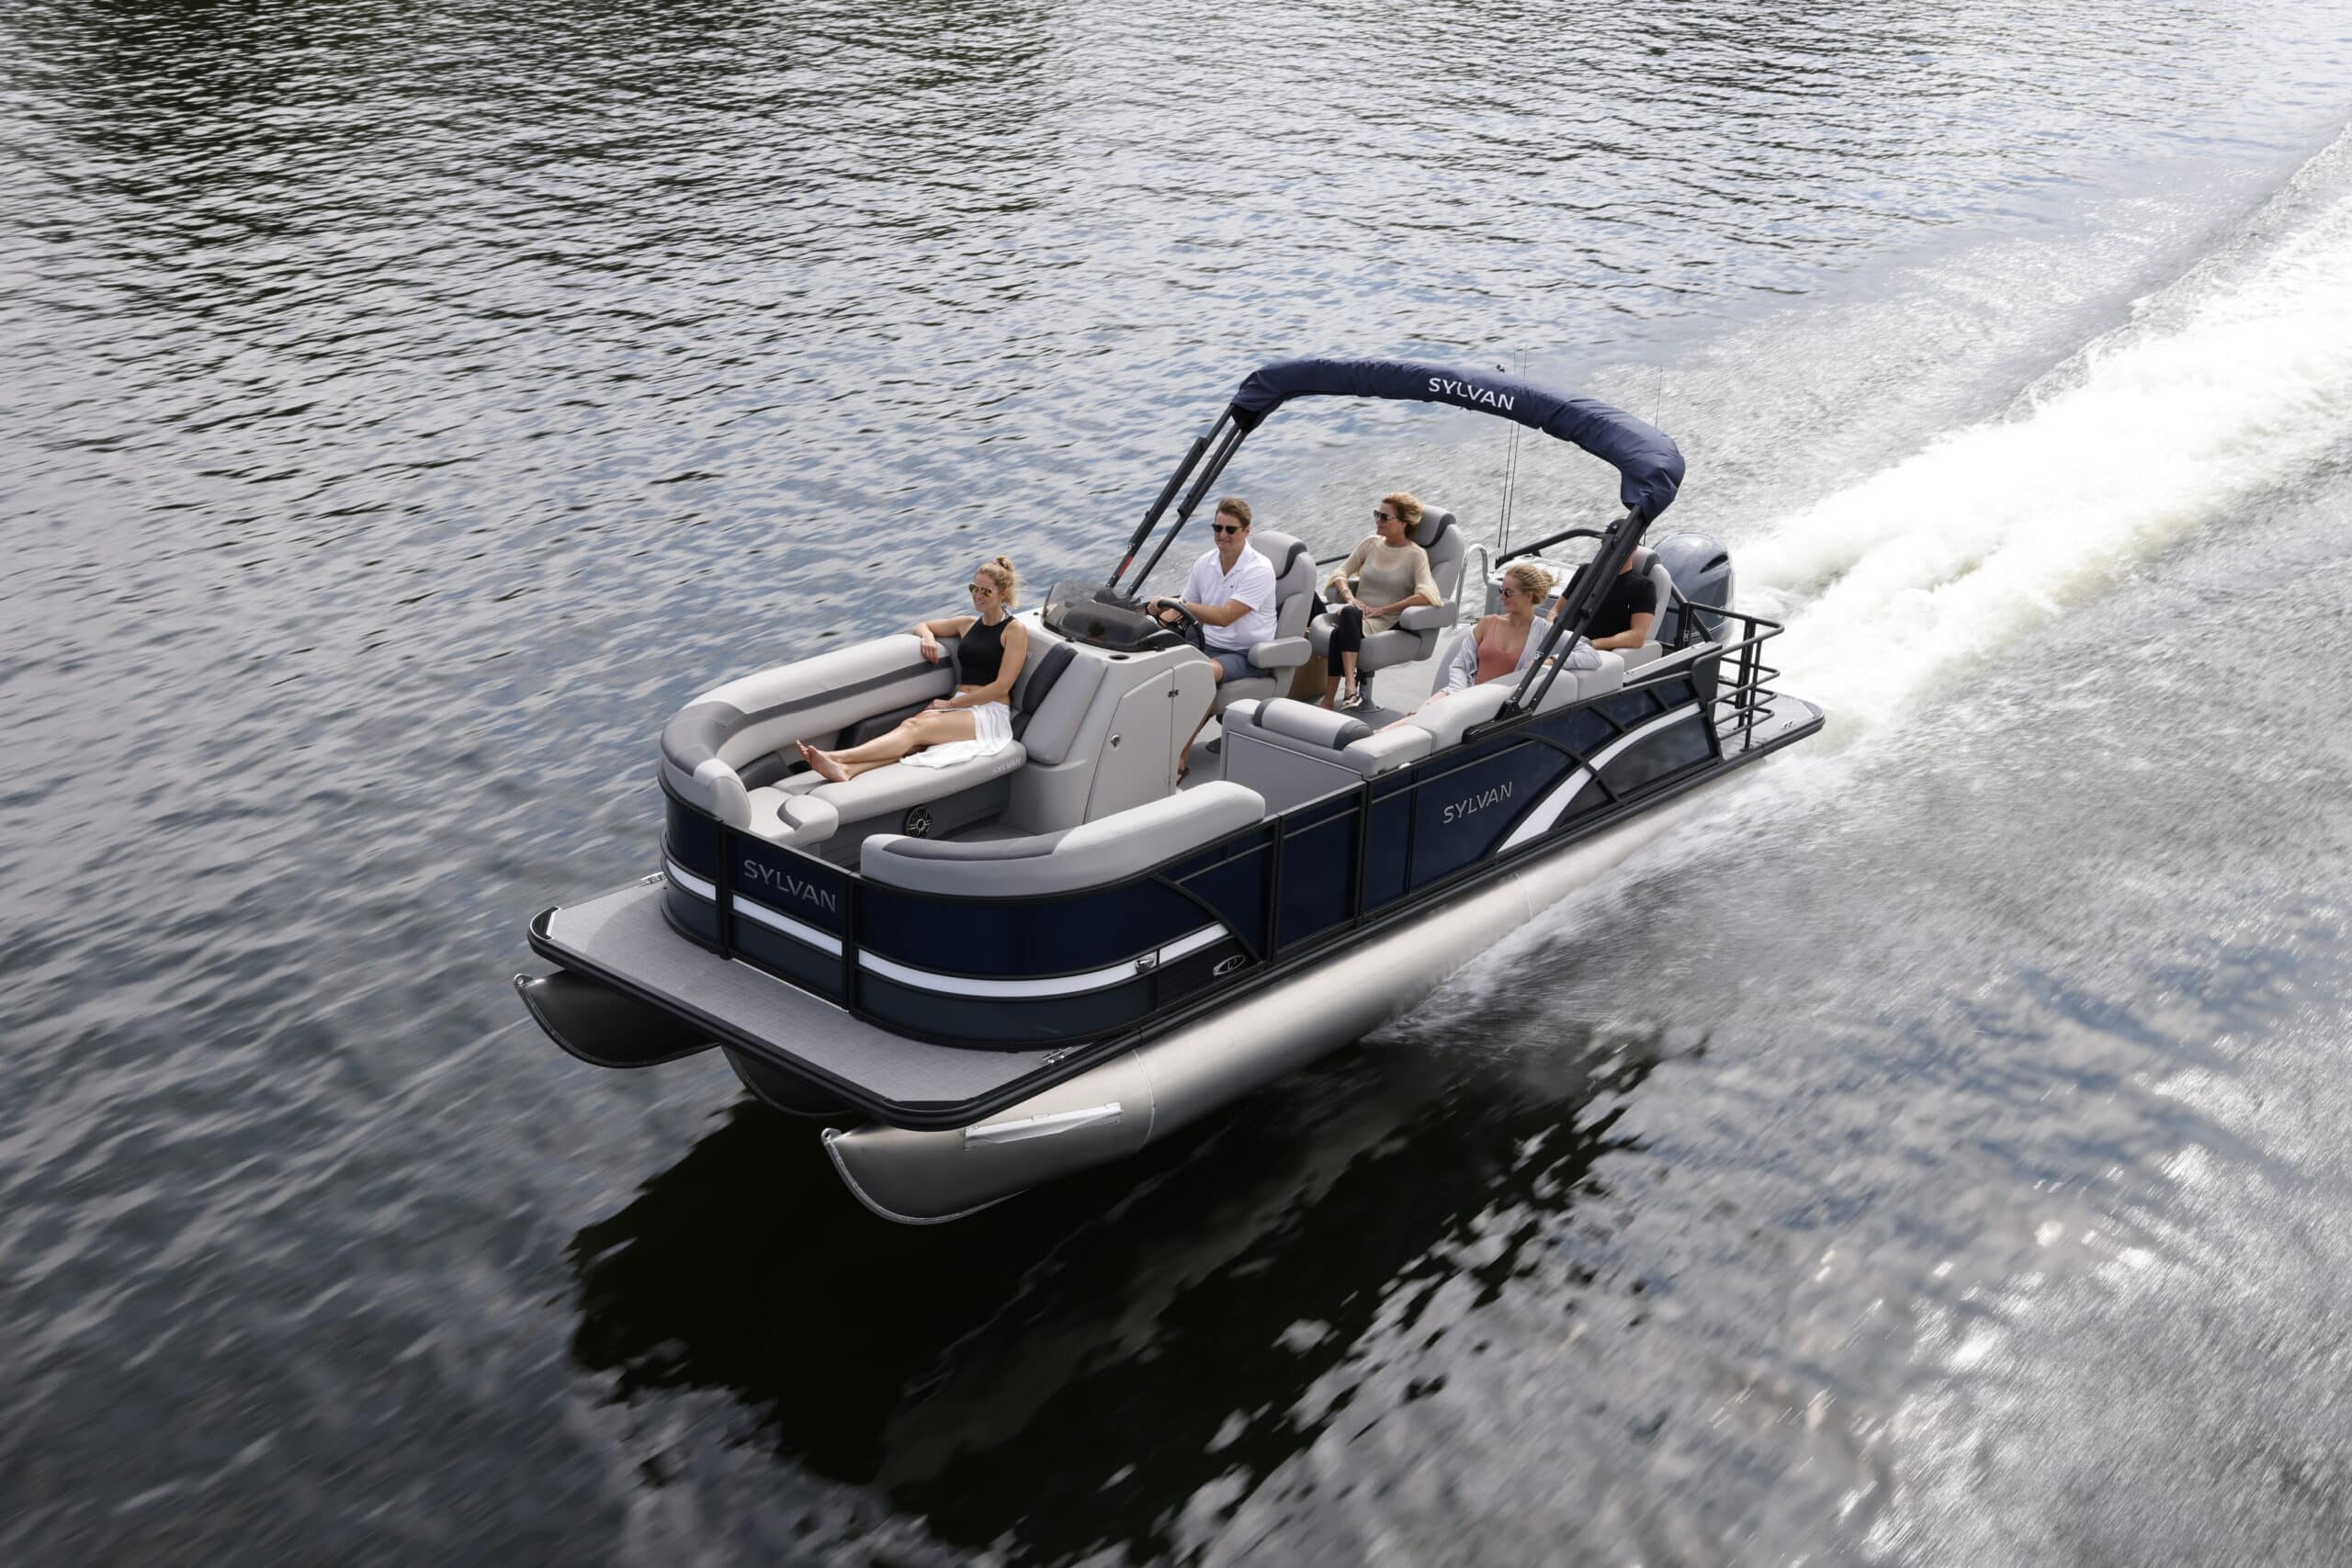 https://shelteredcovemarina.com/wp-content/uploads/2023/07/4-reasons-why-sylvan-pontoon-boats-are-the-perfect-choice-for-your-next-adventure-scaled.jpeg